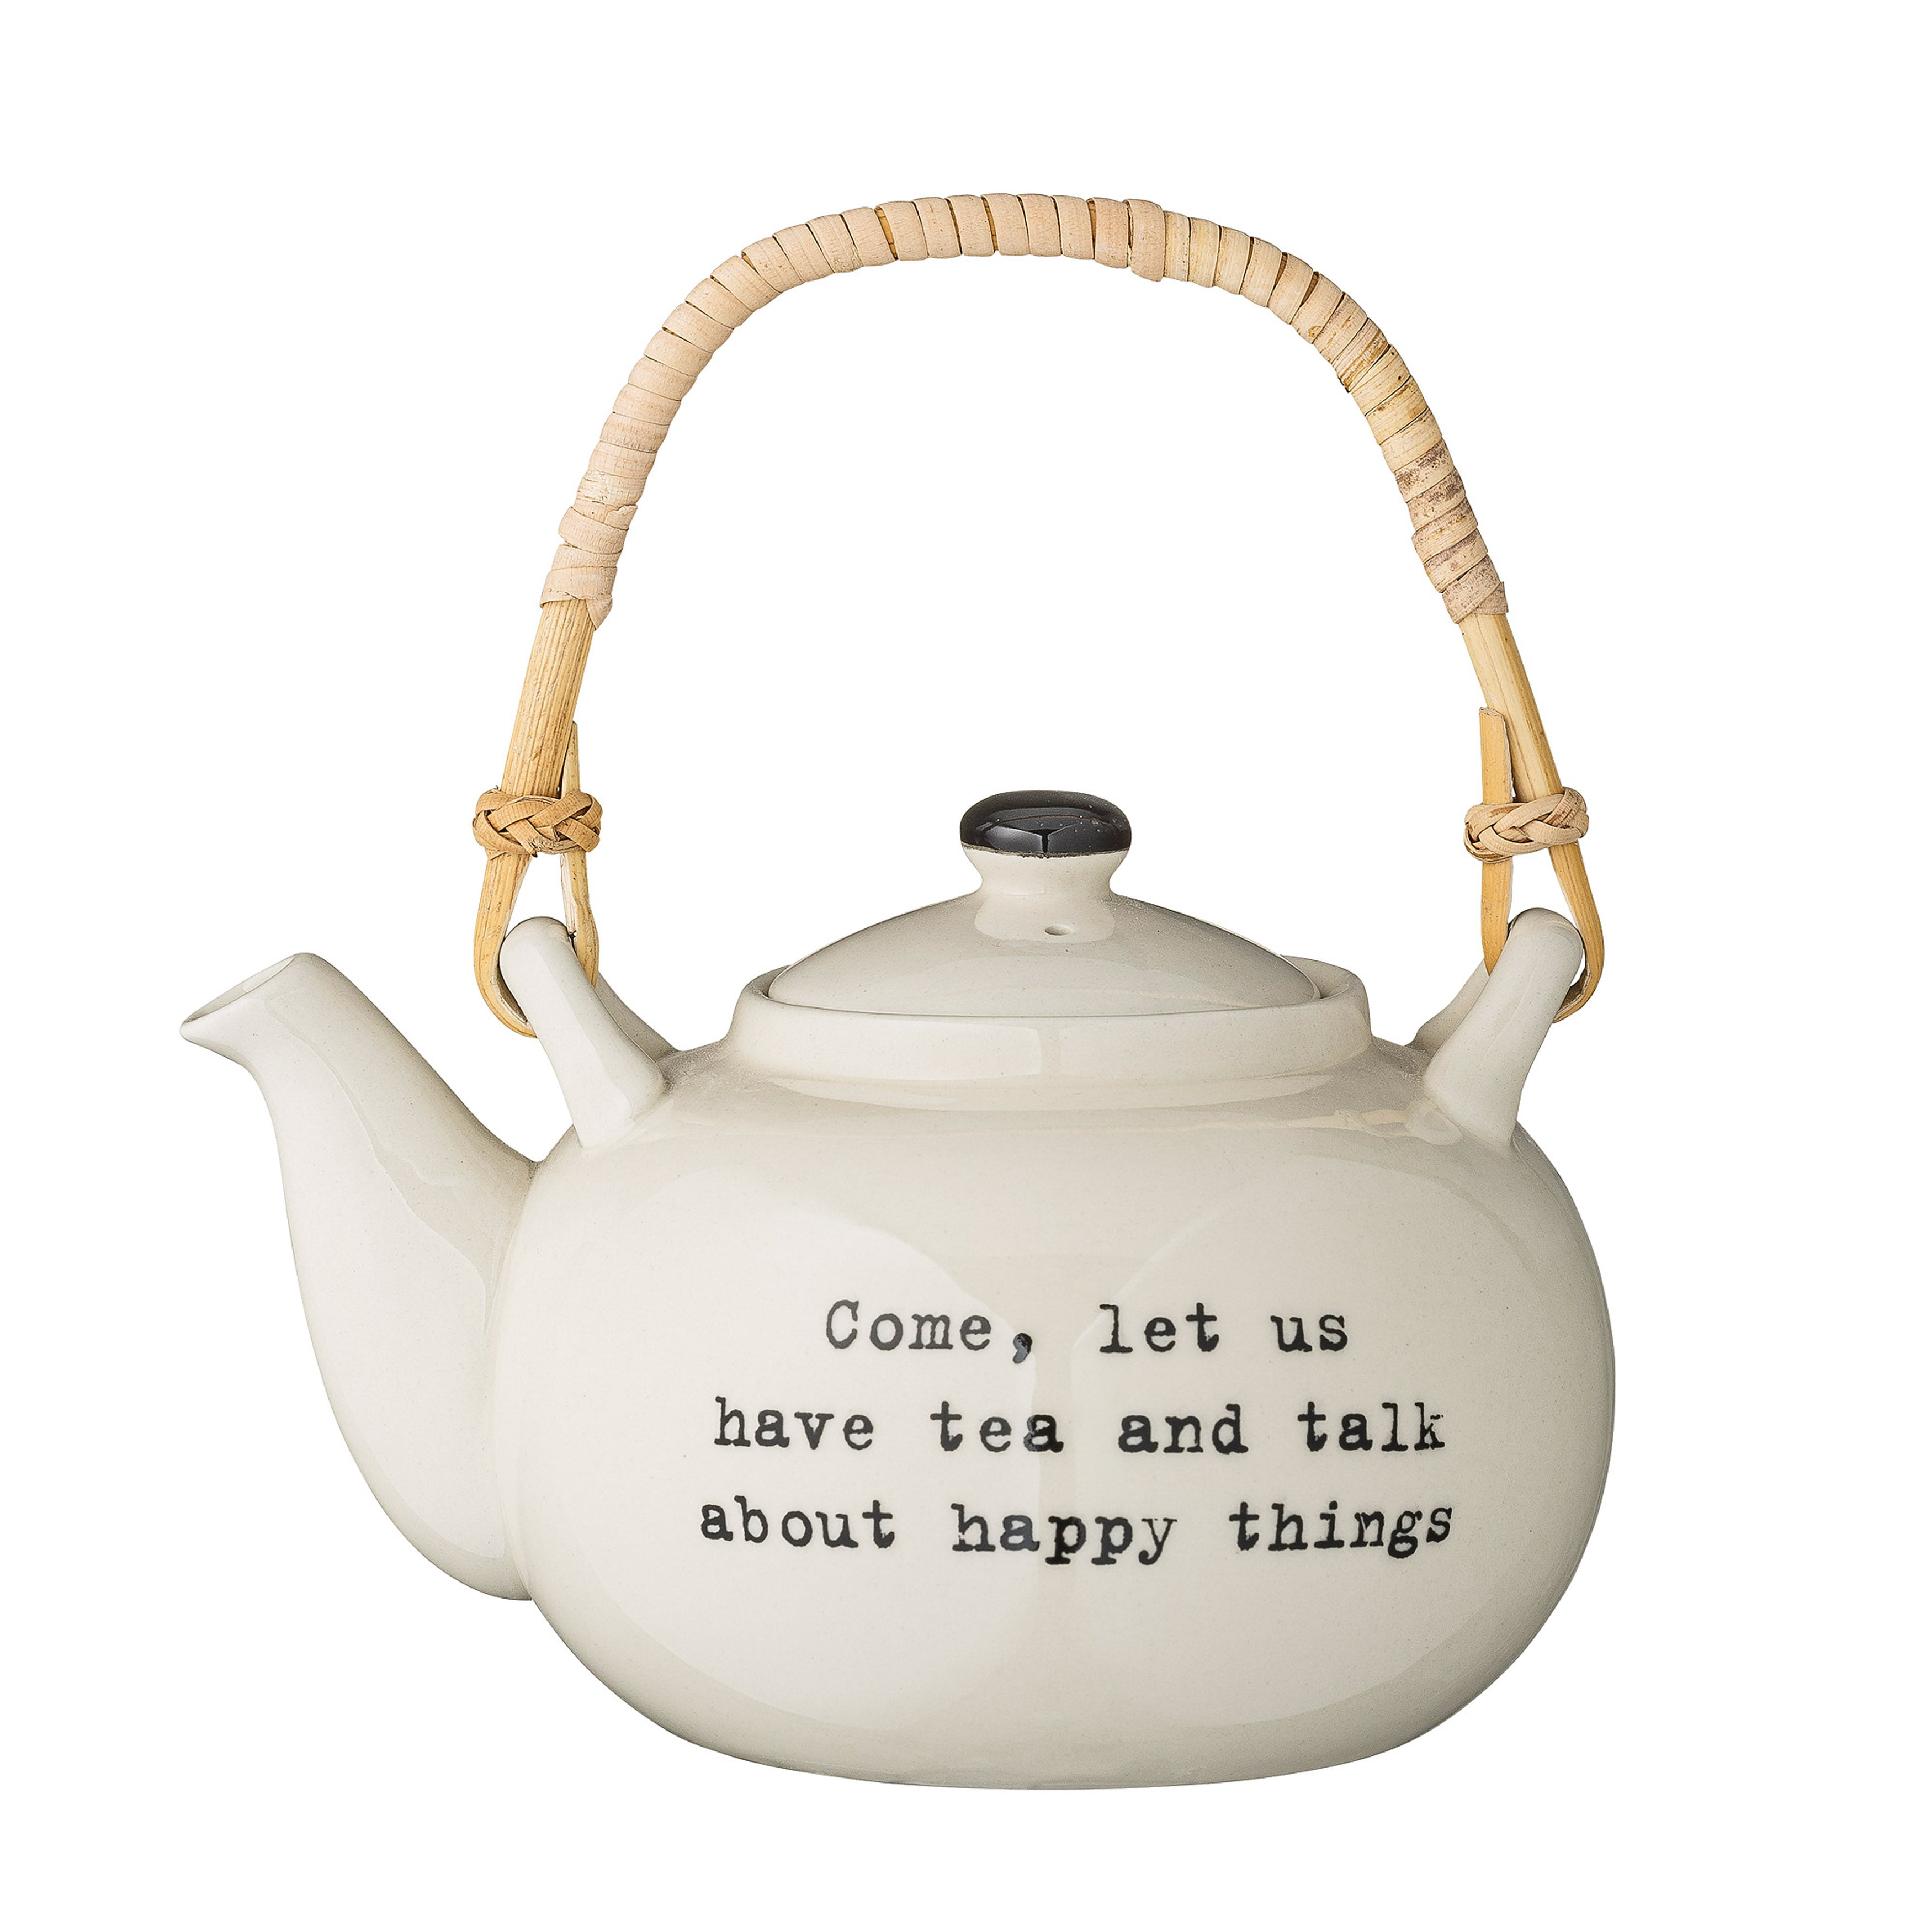 If you don't talk to your co-workers about tea-kettle use, who